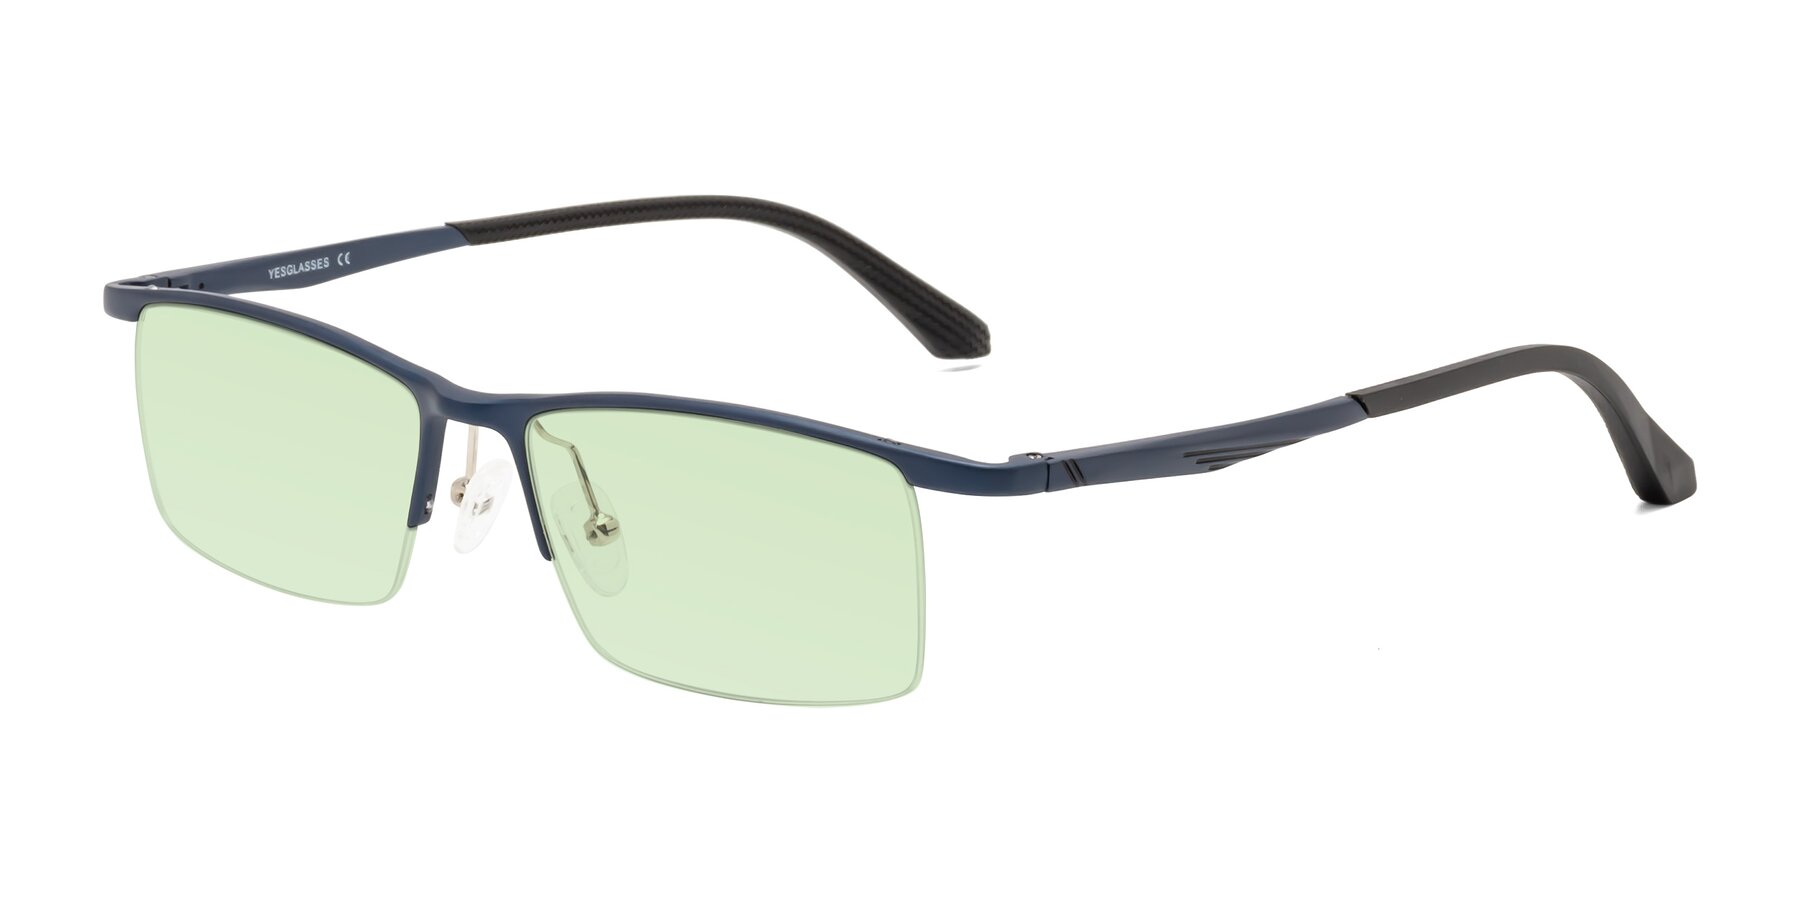 Angle of CX6236 in Blue with Light Green Tinted Lenses